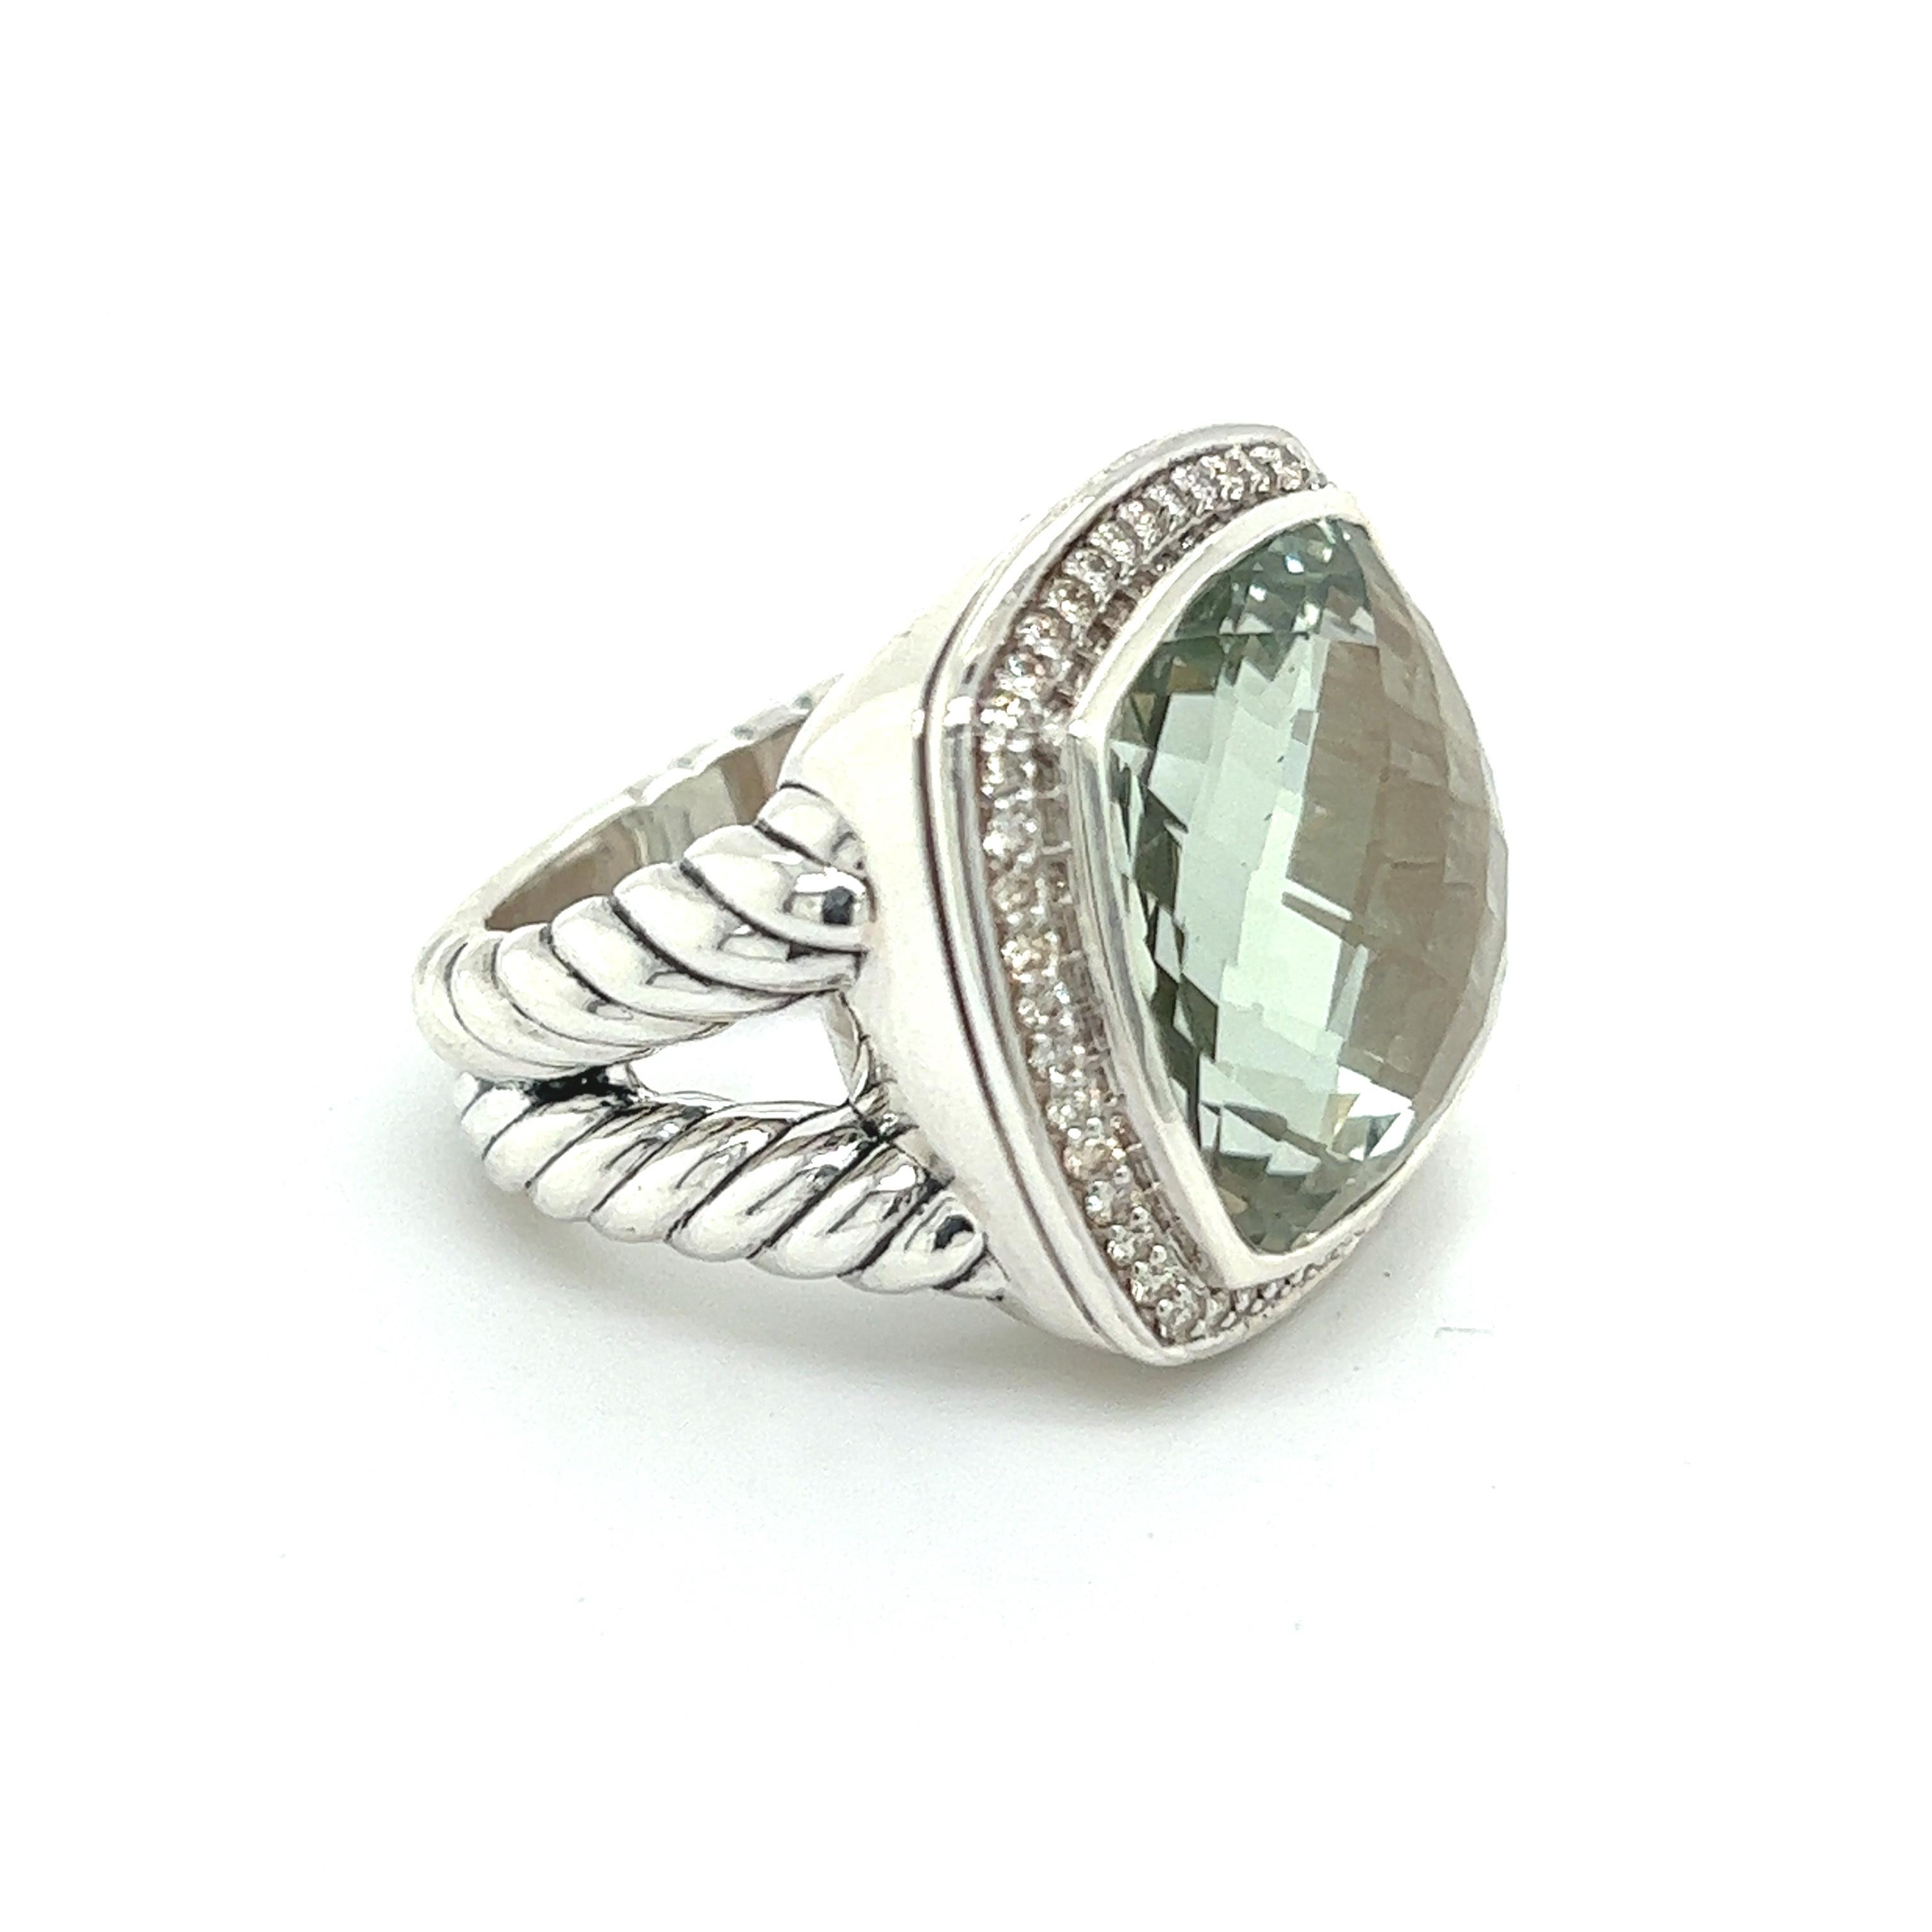 Authentic David Yurman Estate Prasiolite Pave Diamond Albion Ring Size 6 Silver 17 mm DY239

Retail: $1,549.00

Ring from ALBION COLLECTION

This elegant Authentic David Yurman ring is made of sterling silver.

TRUSTED SELLER SINCE 2002

PLEASE SEE